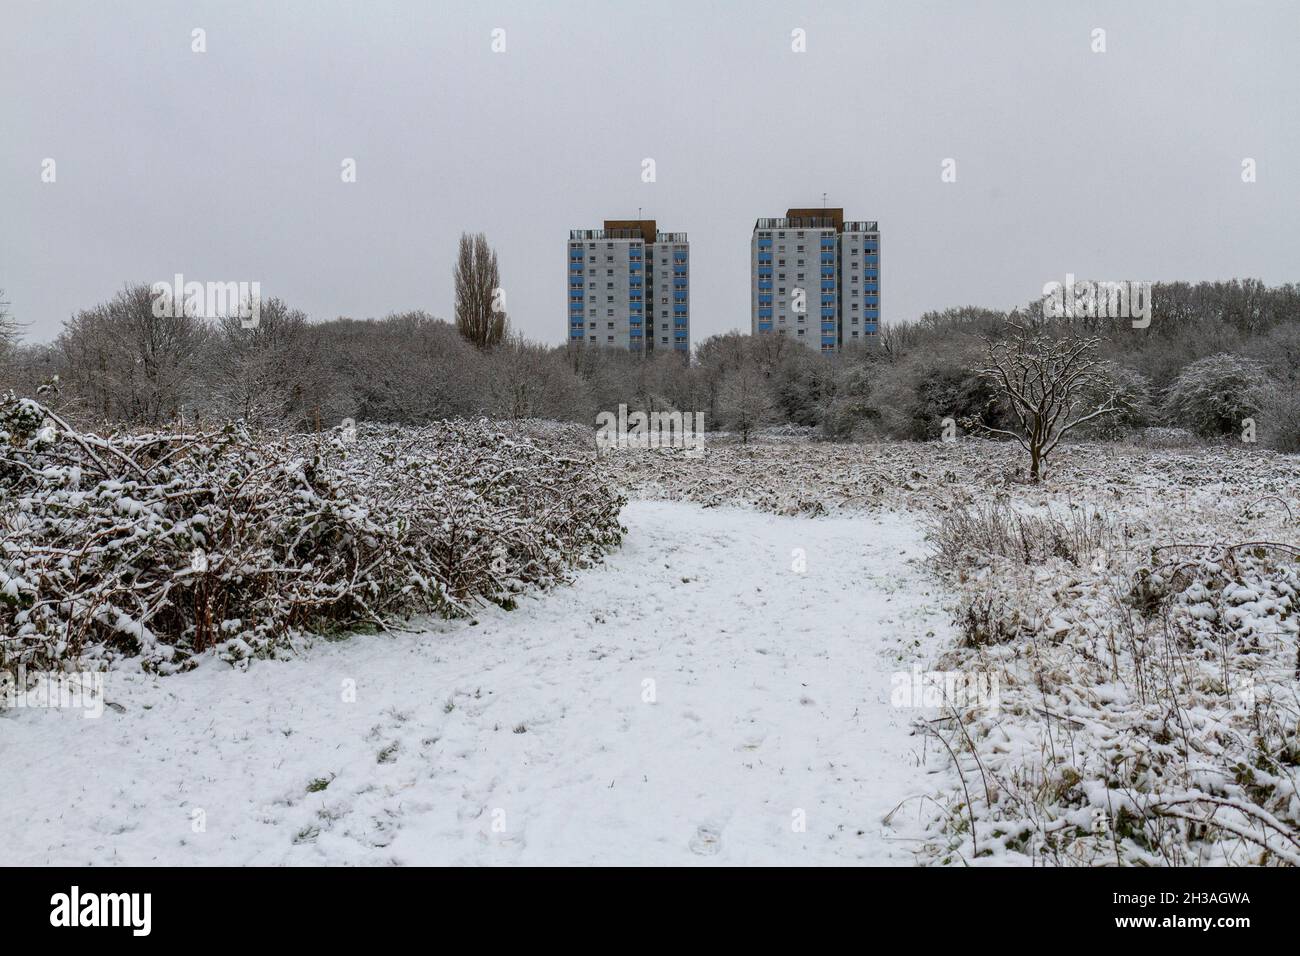 View during heavy snow storm towards the towers of Hounslow Heath Estate (Slade House (L) and Jamieson House (R) of Hounslow Heath, London, UK. Stock Photo